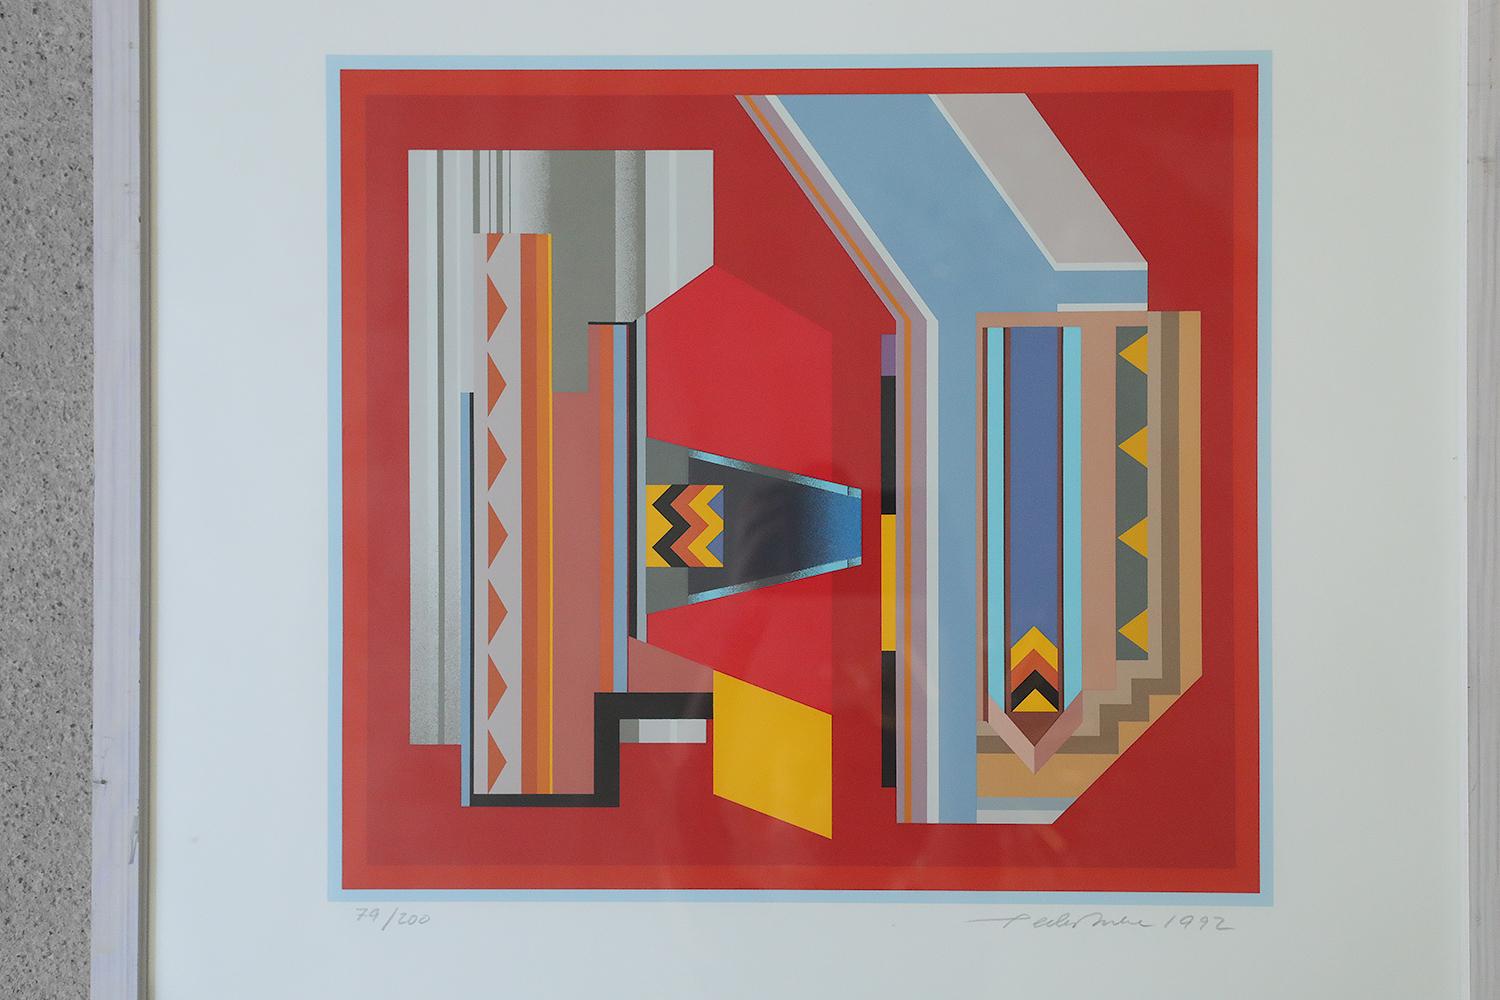 Peder Duke, Composition, 1992
Color serigraphy
Number 79/200
The work is signed with the artist's signature, date and an individual number (pencil)
Sheet dimensions 60/61
Framed work

Peder Duke (1938 - 2003) was a Swedish painter who quickly found